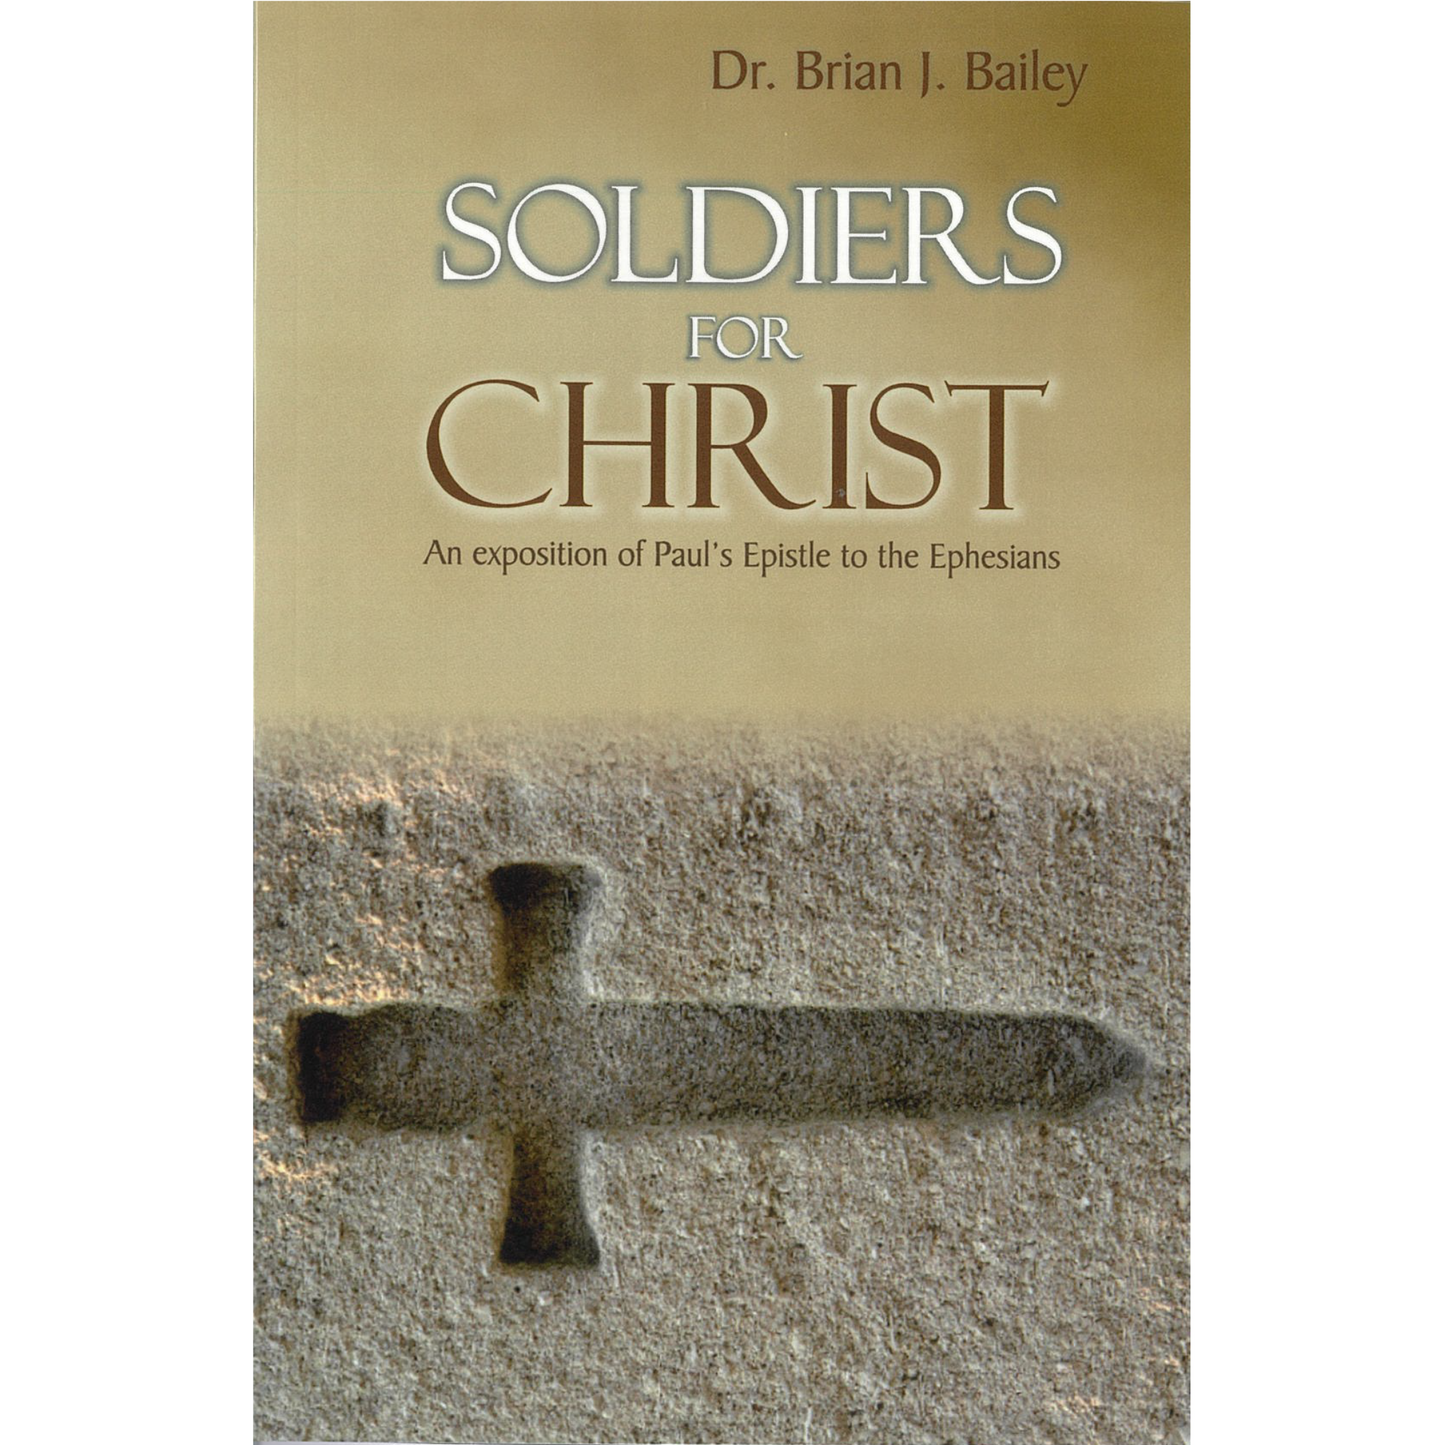 Soldiers For Christ-An Exposition Of Paul's Epistle to the Ephesians